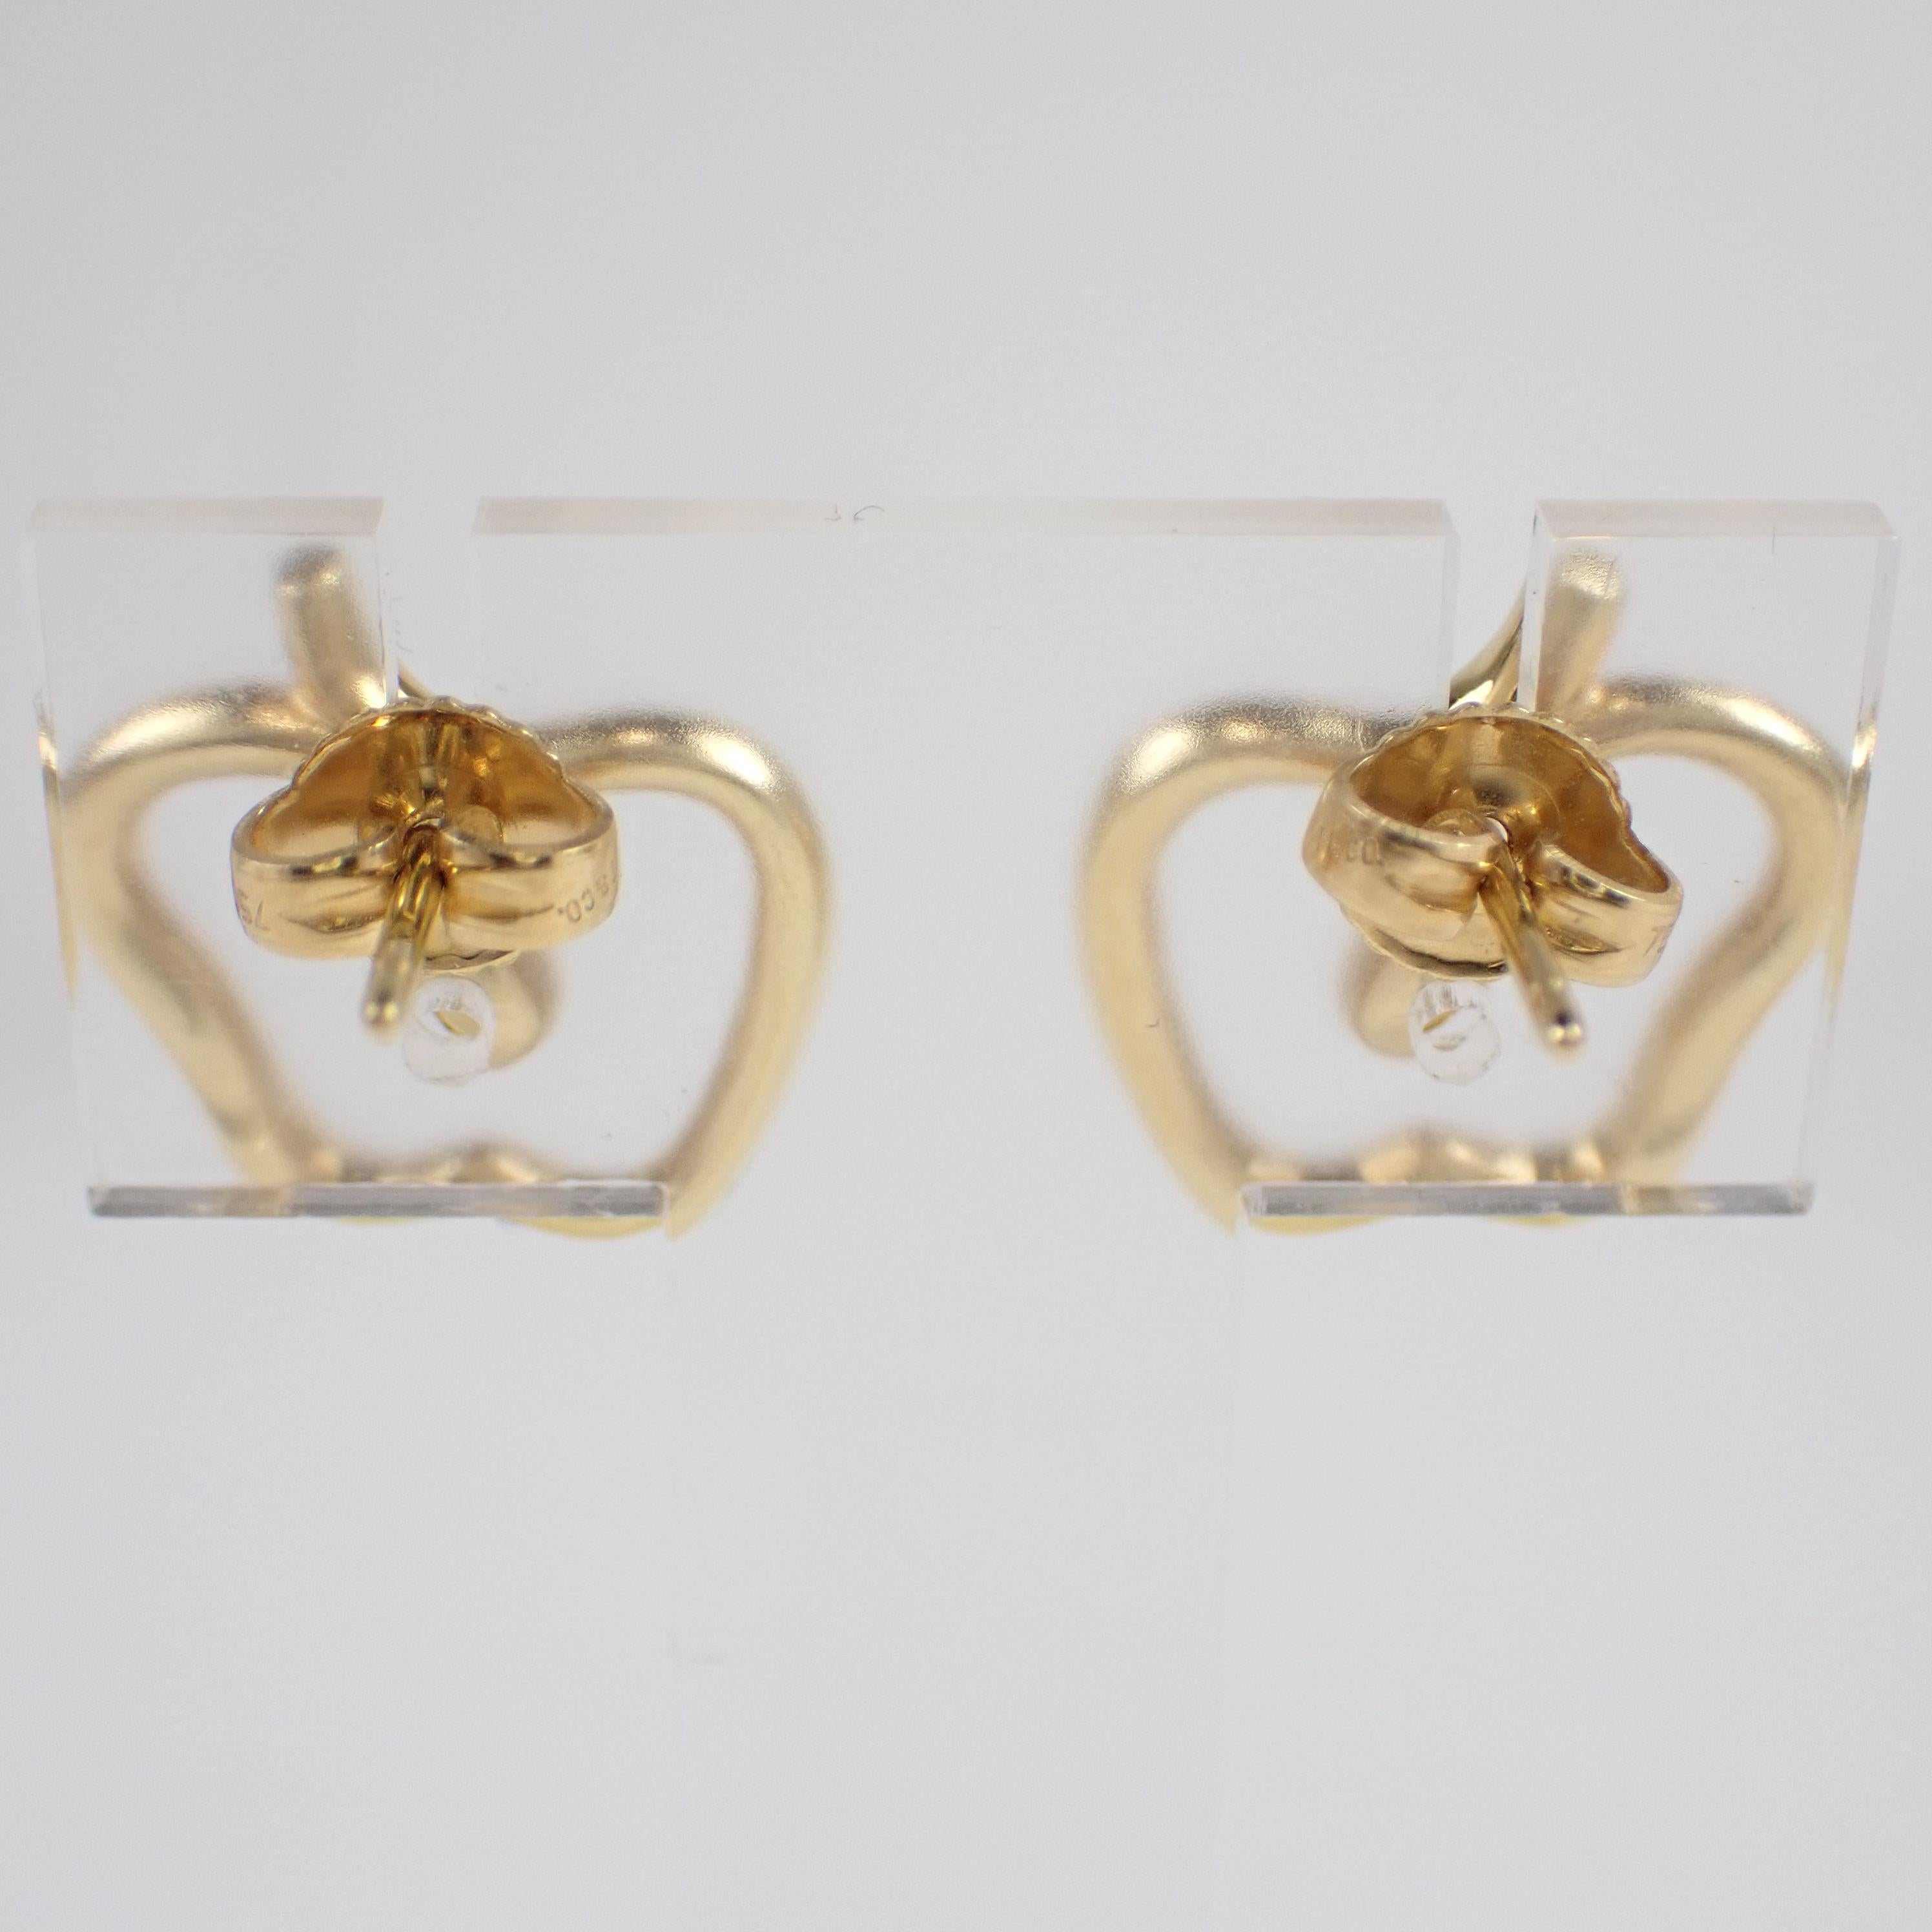 Brand : Tiffany & Co.  
Description: Tiffany & Co. 18K Yellow Gold Apple Earrings 750YG box
Metal Type: 750YG/Yellow Gold
Weight 6.2g
Condition: Preowned; small signs of wearing
Box -  Not Included
Papers - Included
